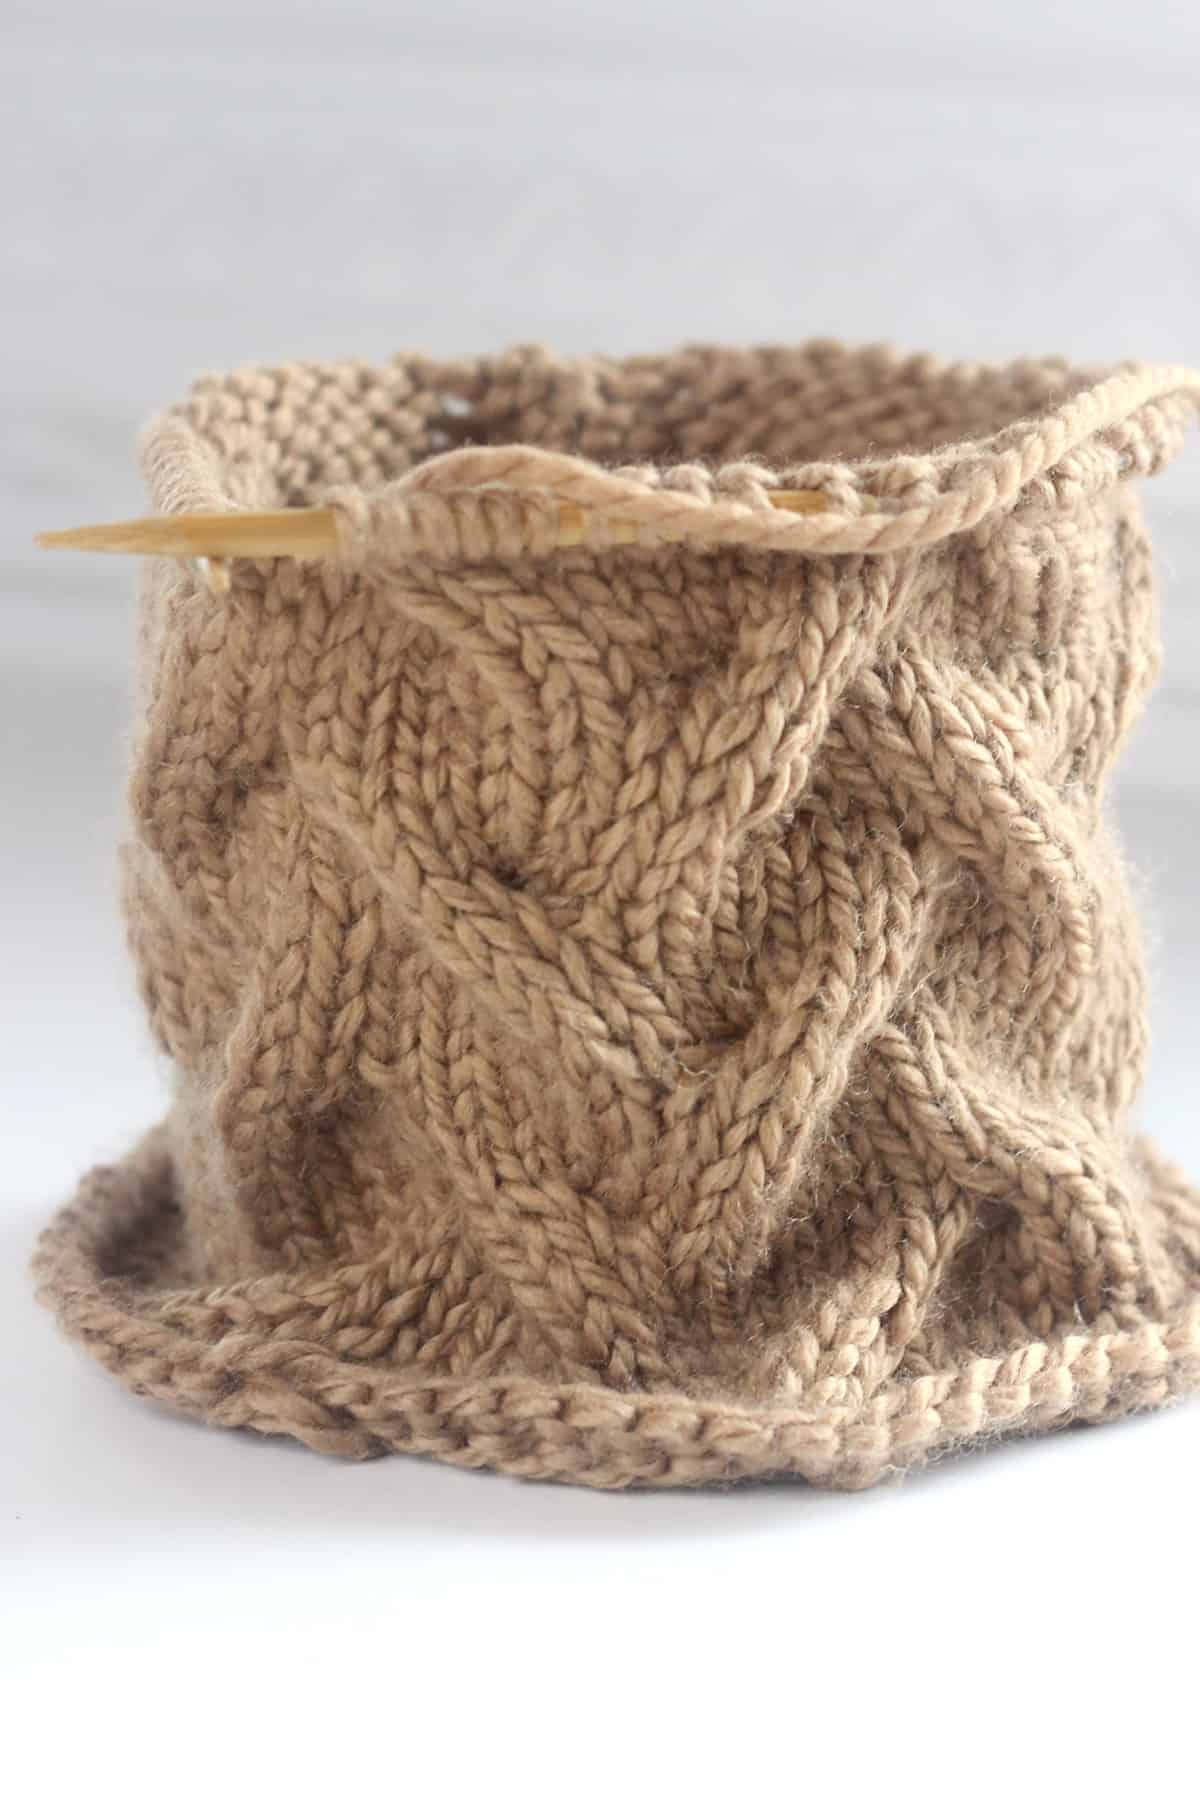 Sand Cable knit stitch texture on circular wooden bamboo needles with brown colored yarn.